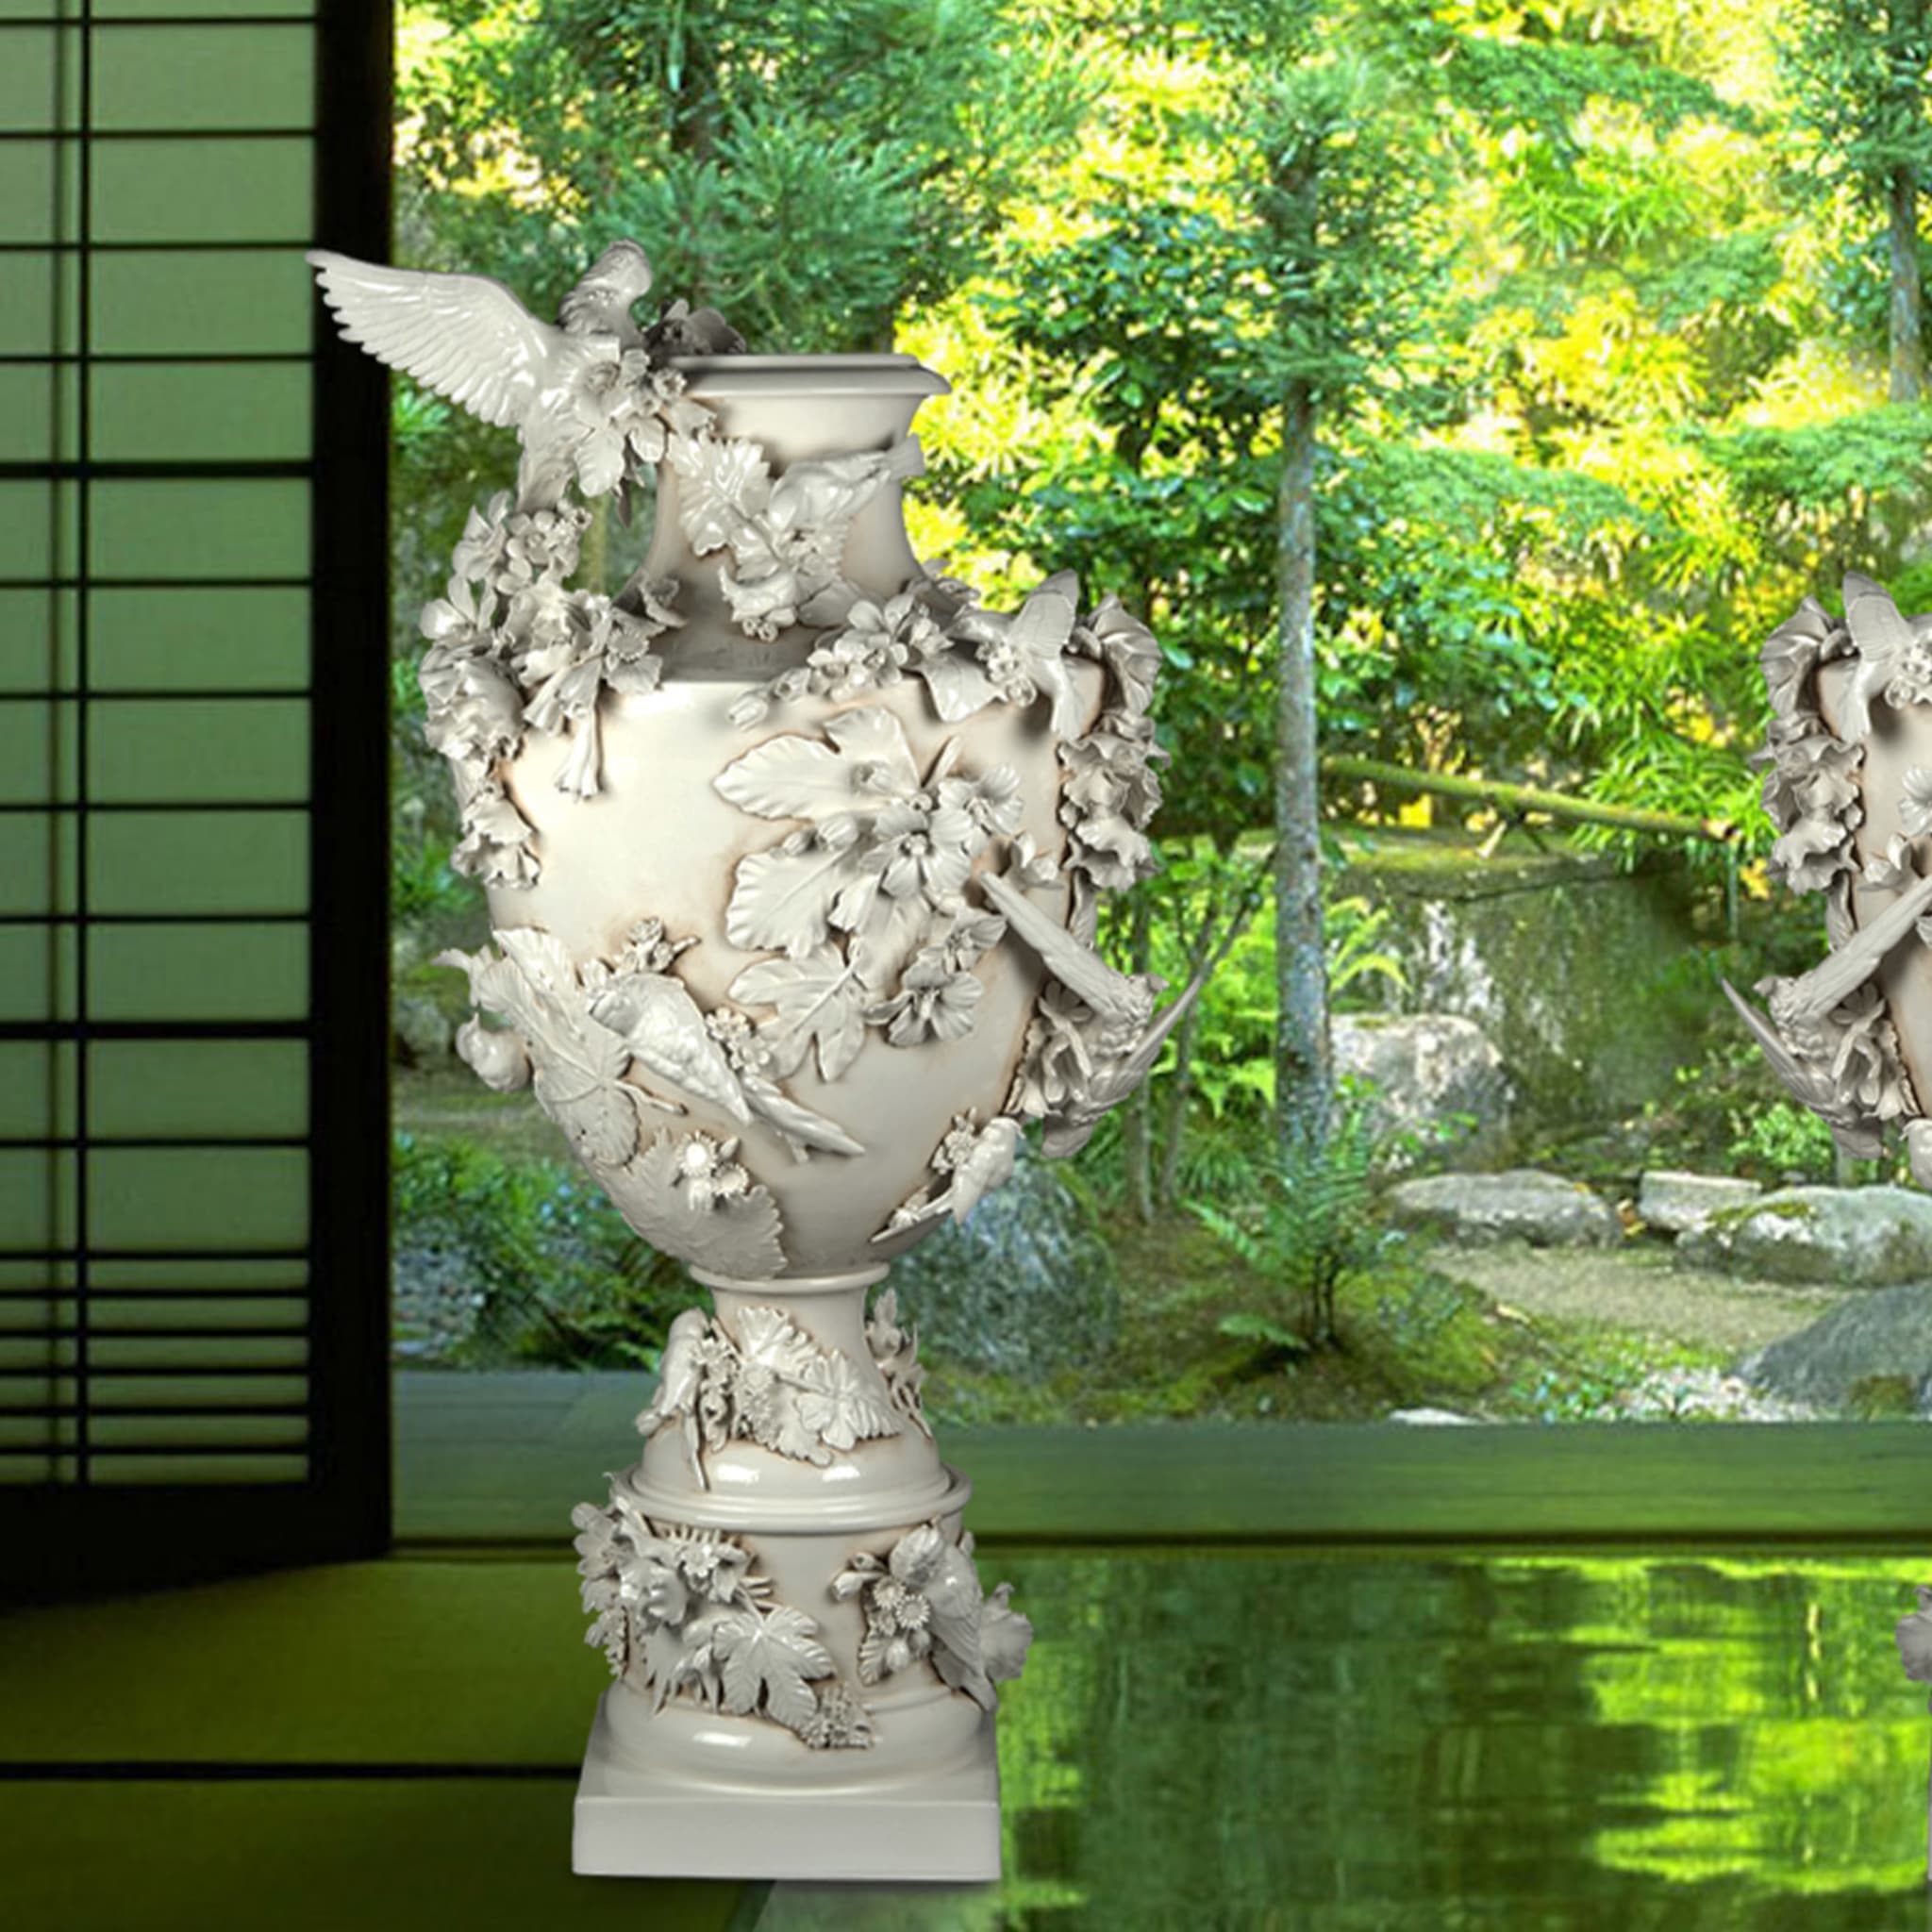 Tropical Antiqued-White Footed Vase by Antonio Fullin - Alternative view 1